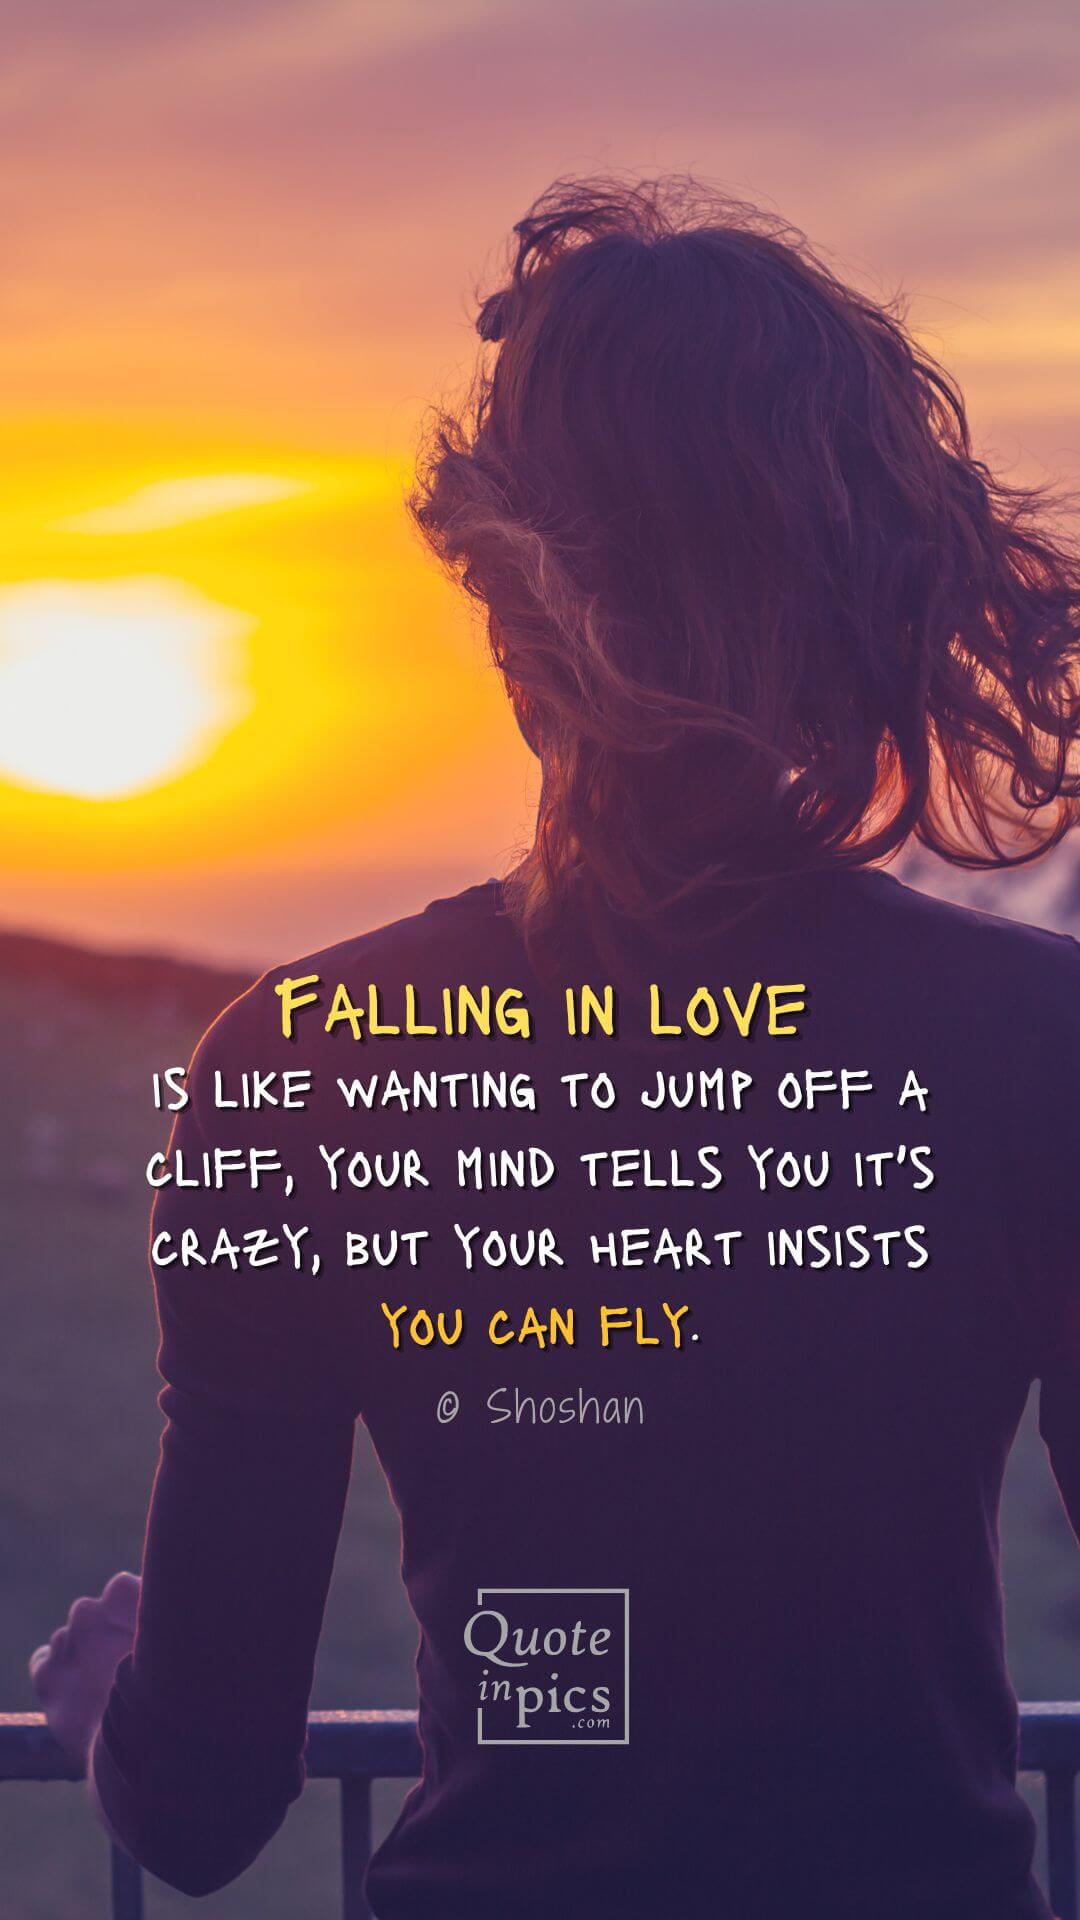 Falling in love is like wanting to jump off a cliff